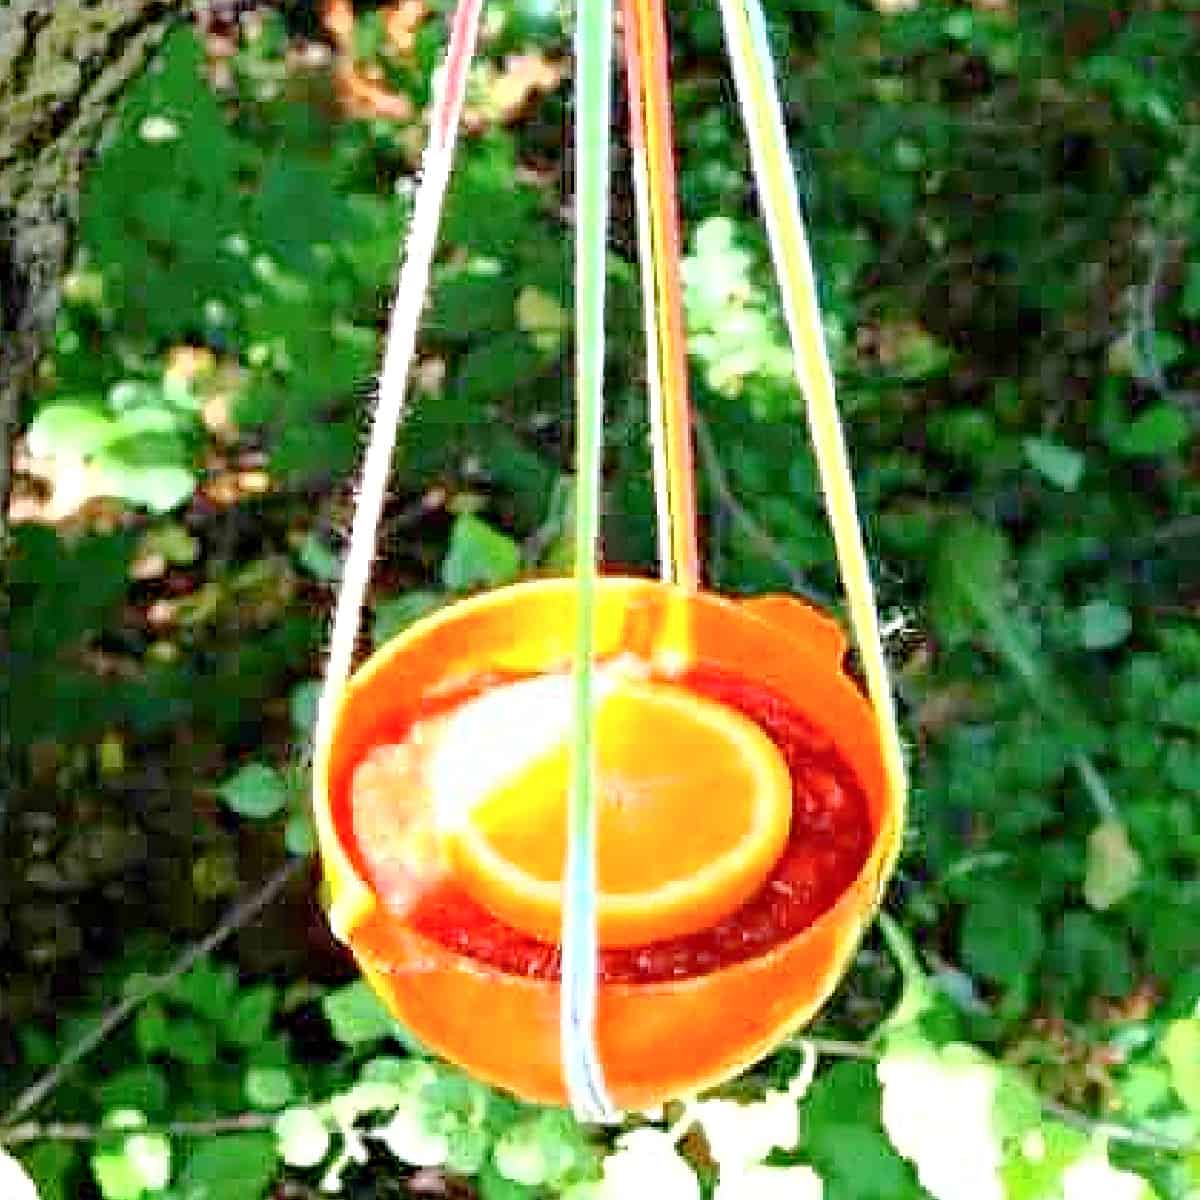 DIY oriole bird feeder with oranges and jelly.